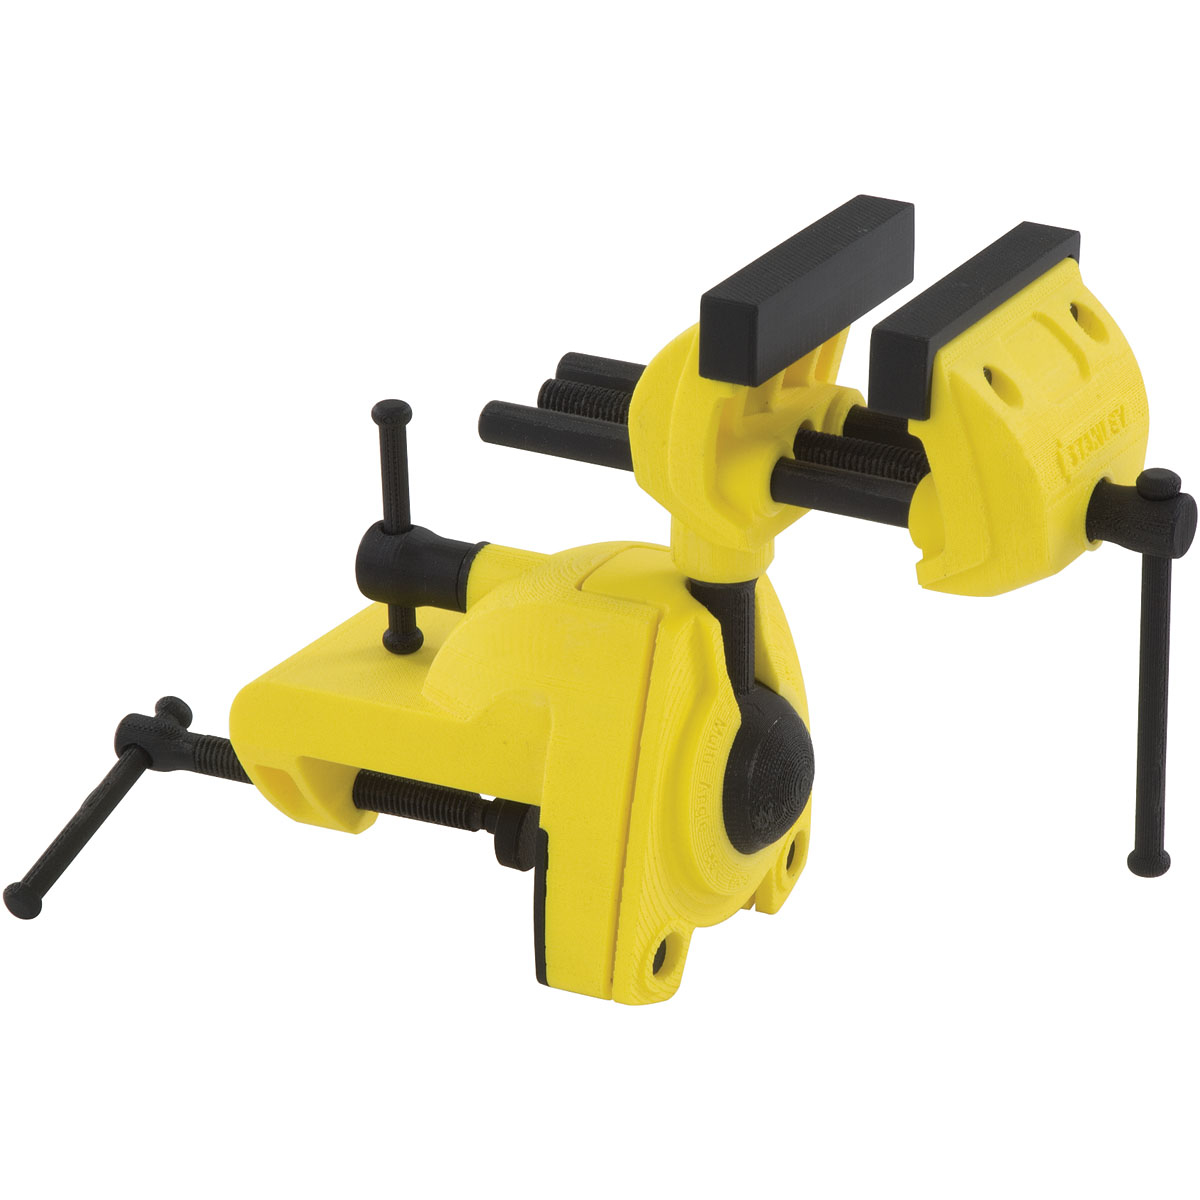 Stanley multi angle vise